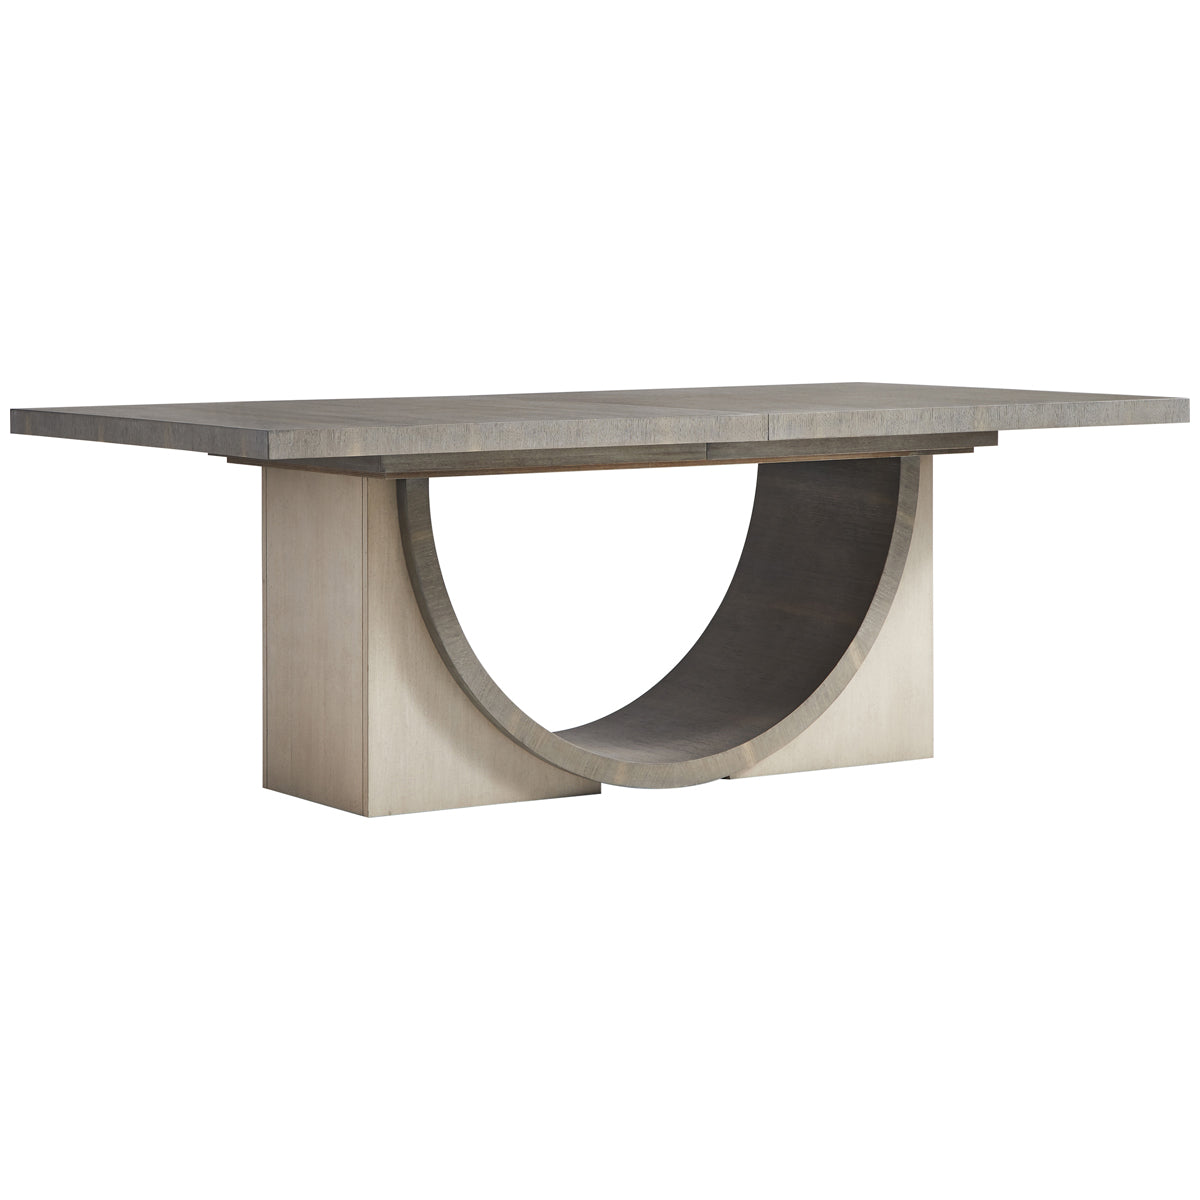 Vanguard Furniture Cove Dining Table